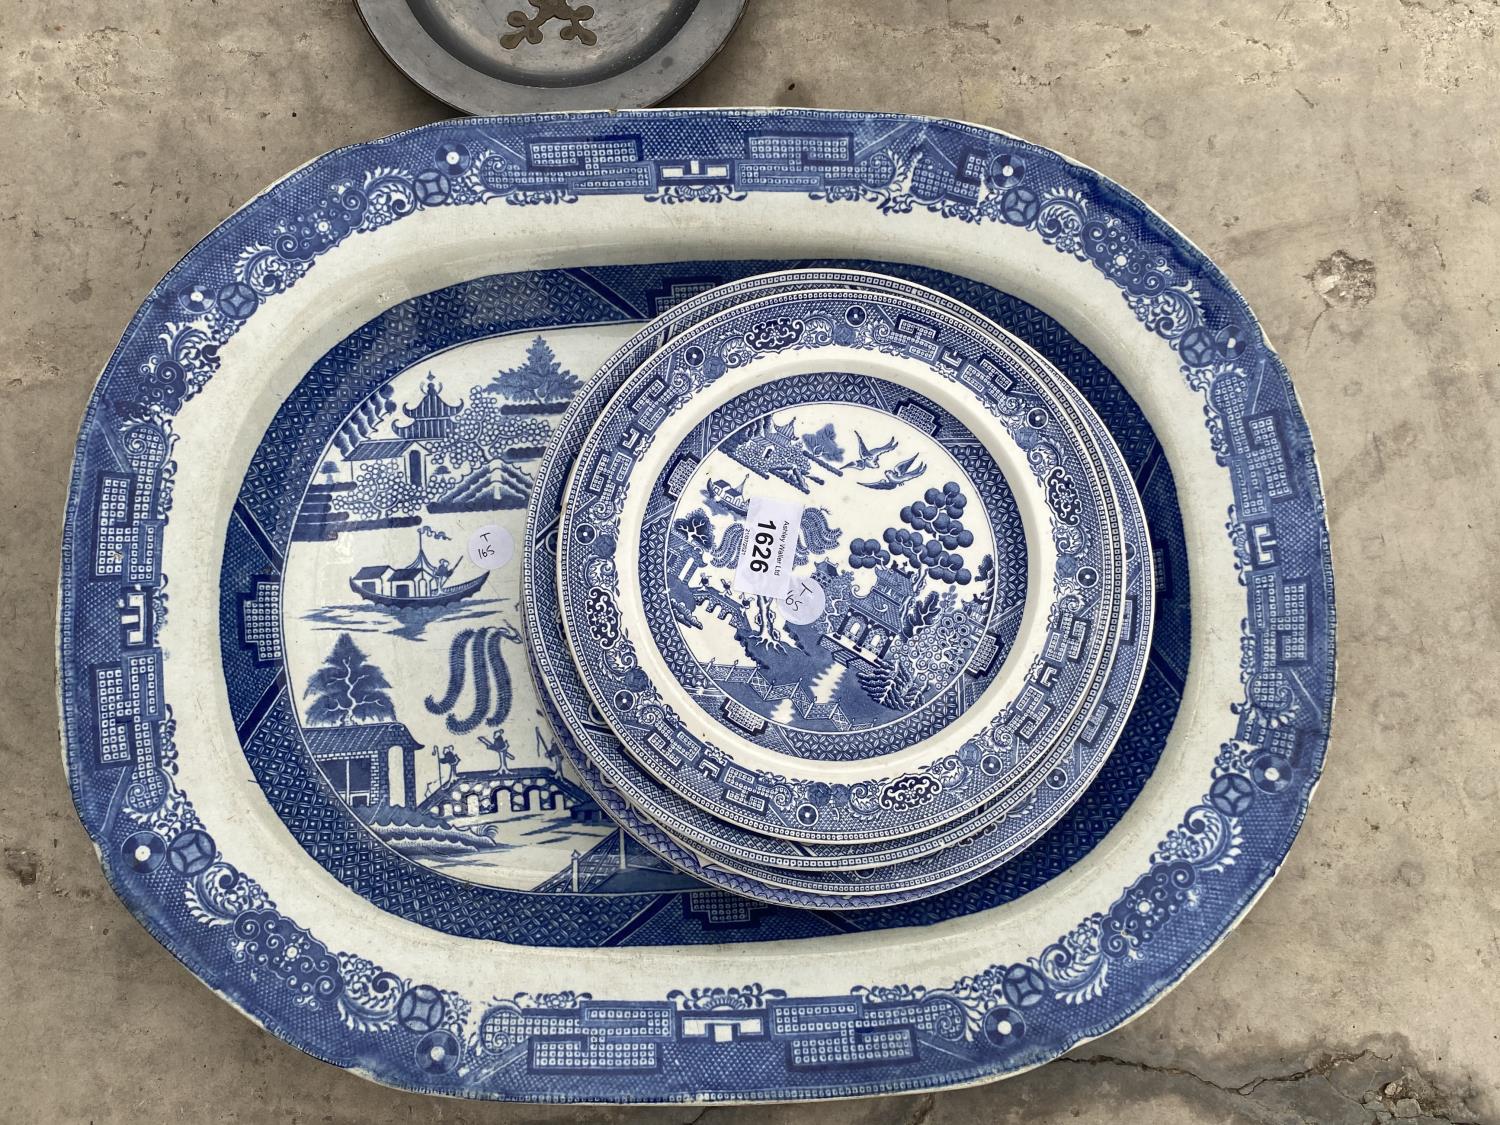 A LARGE BLUE AND WHITE CERAMIC MEAT PLATE AND FURTHER BLUE AND WHITE DINNER PLATES